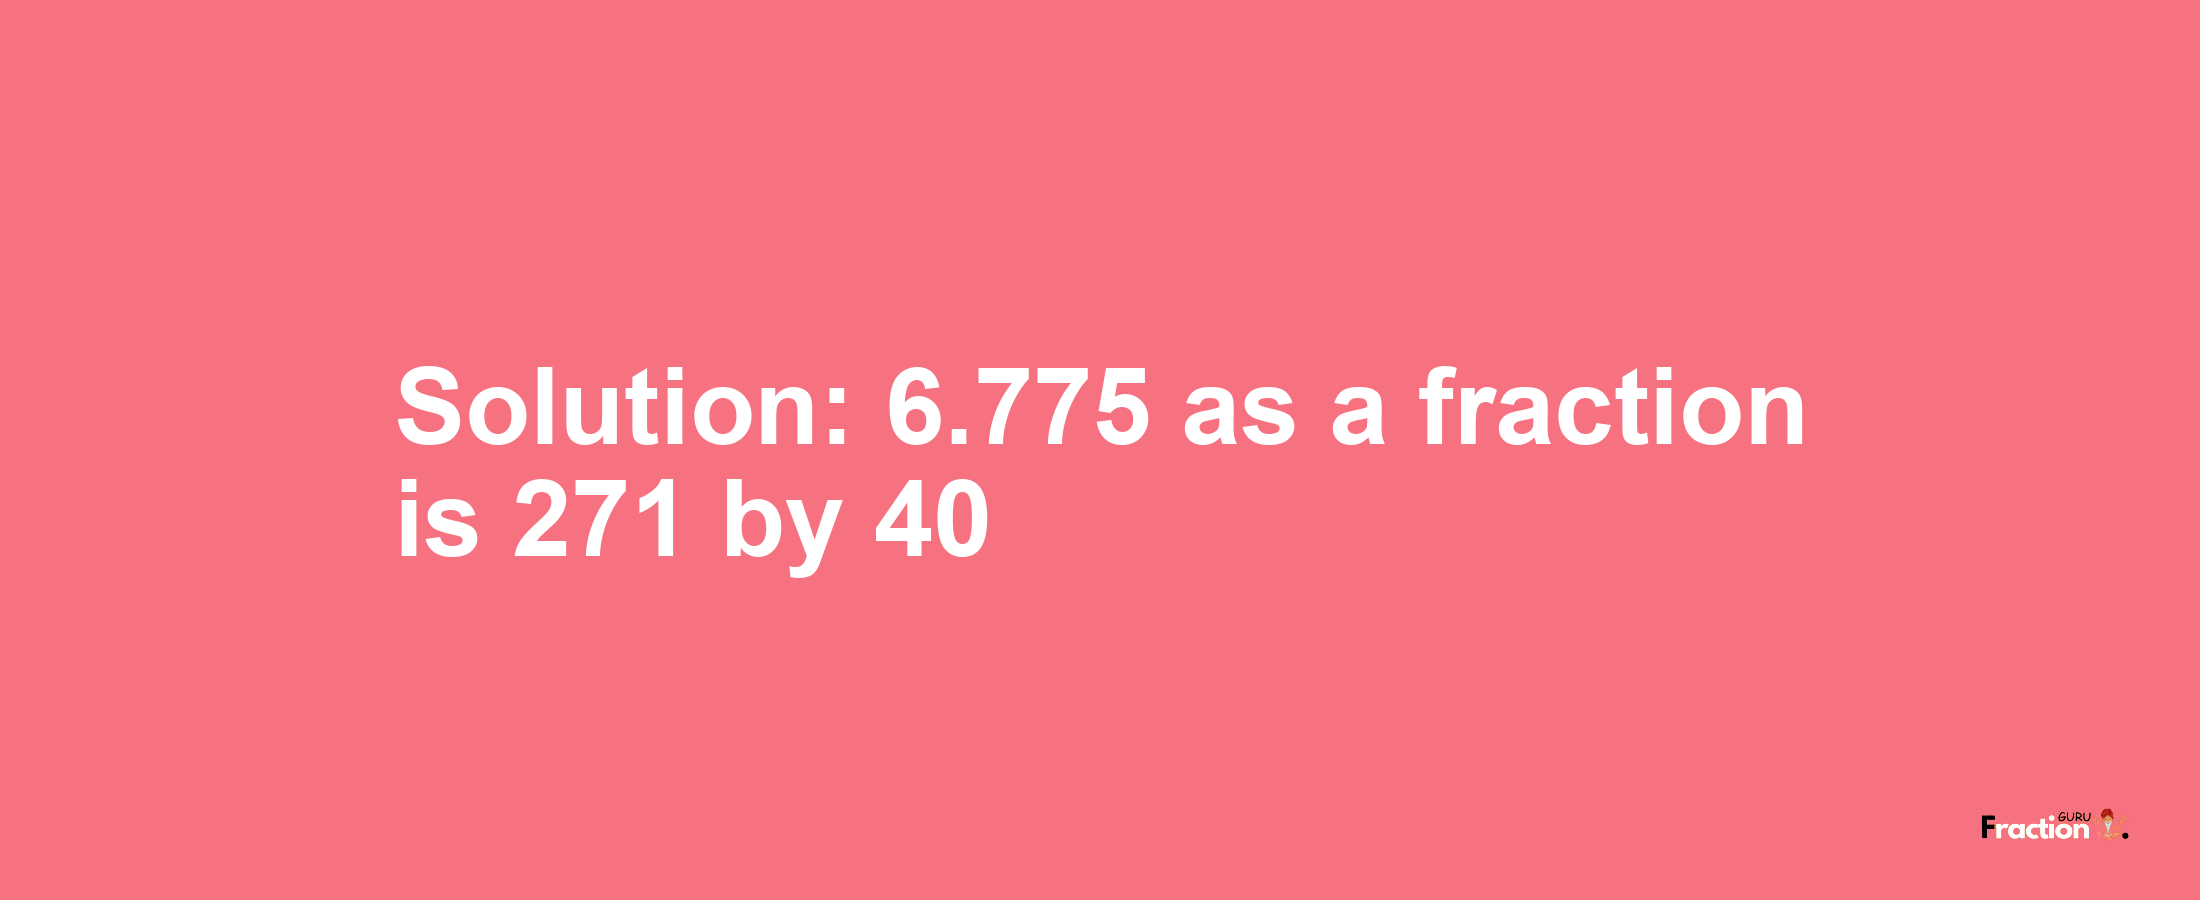 Solution:6.775 as a fraction is 271/40